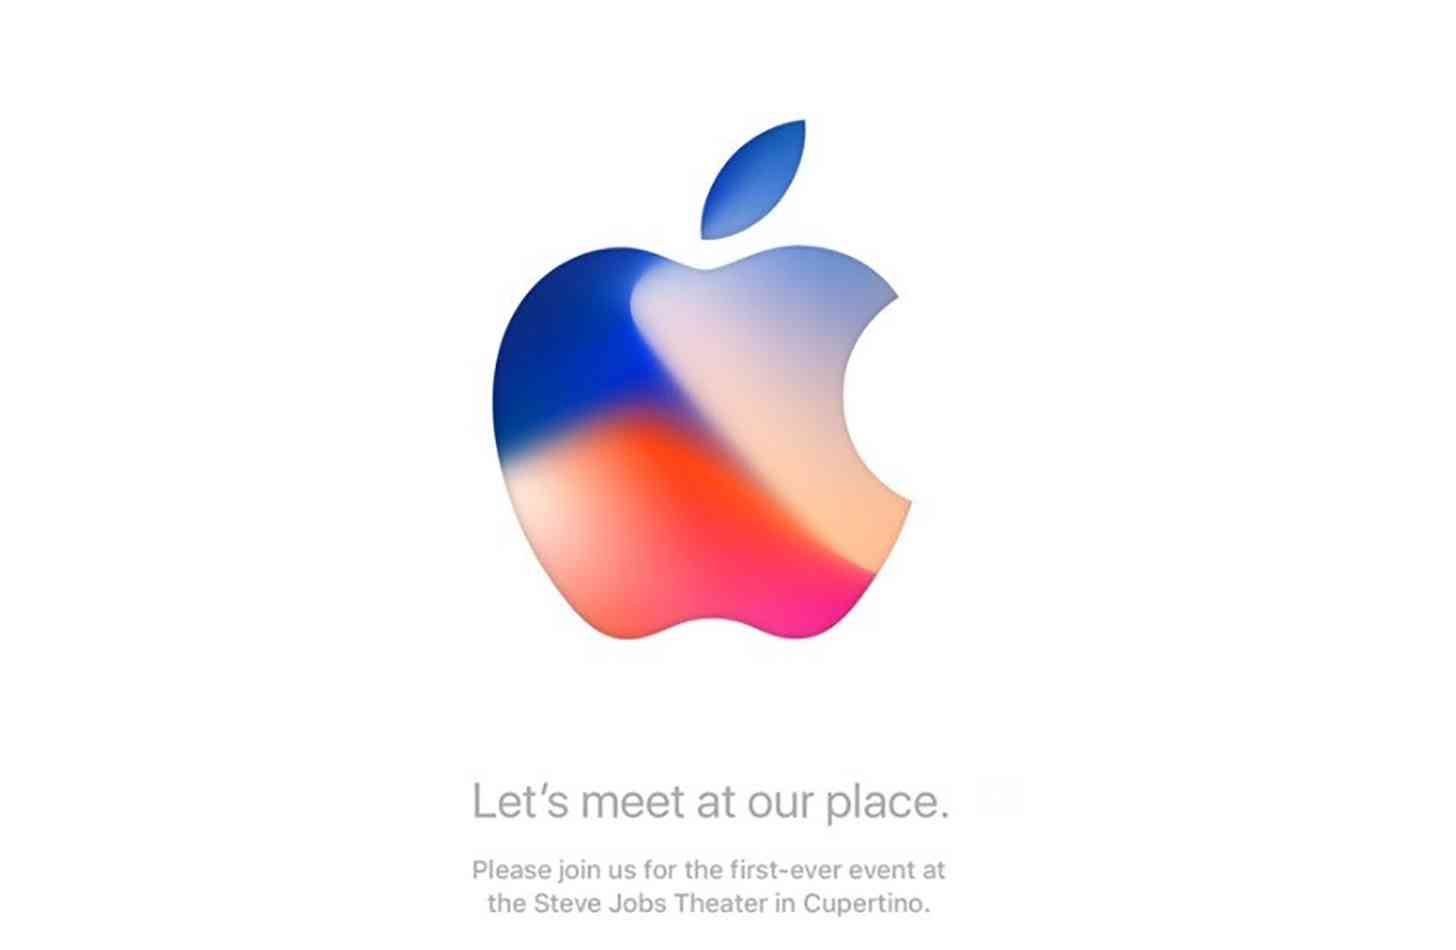 Apple iPhone 8 event invitation official